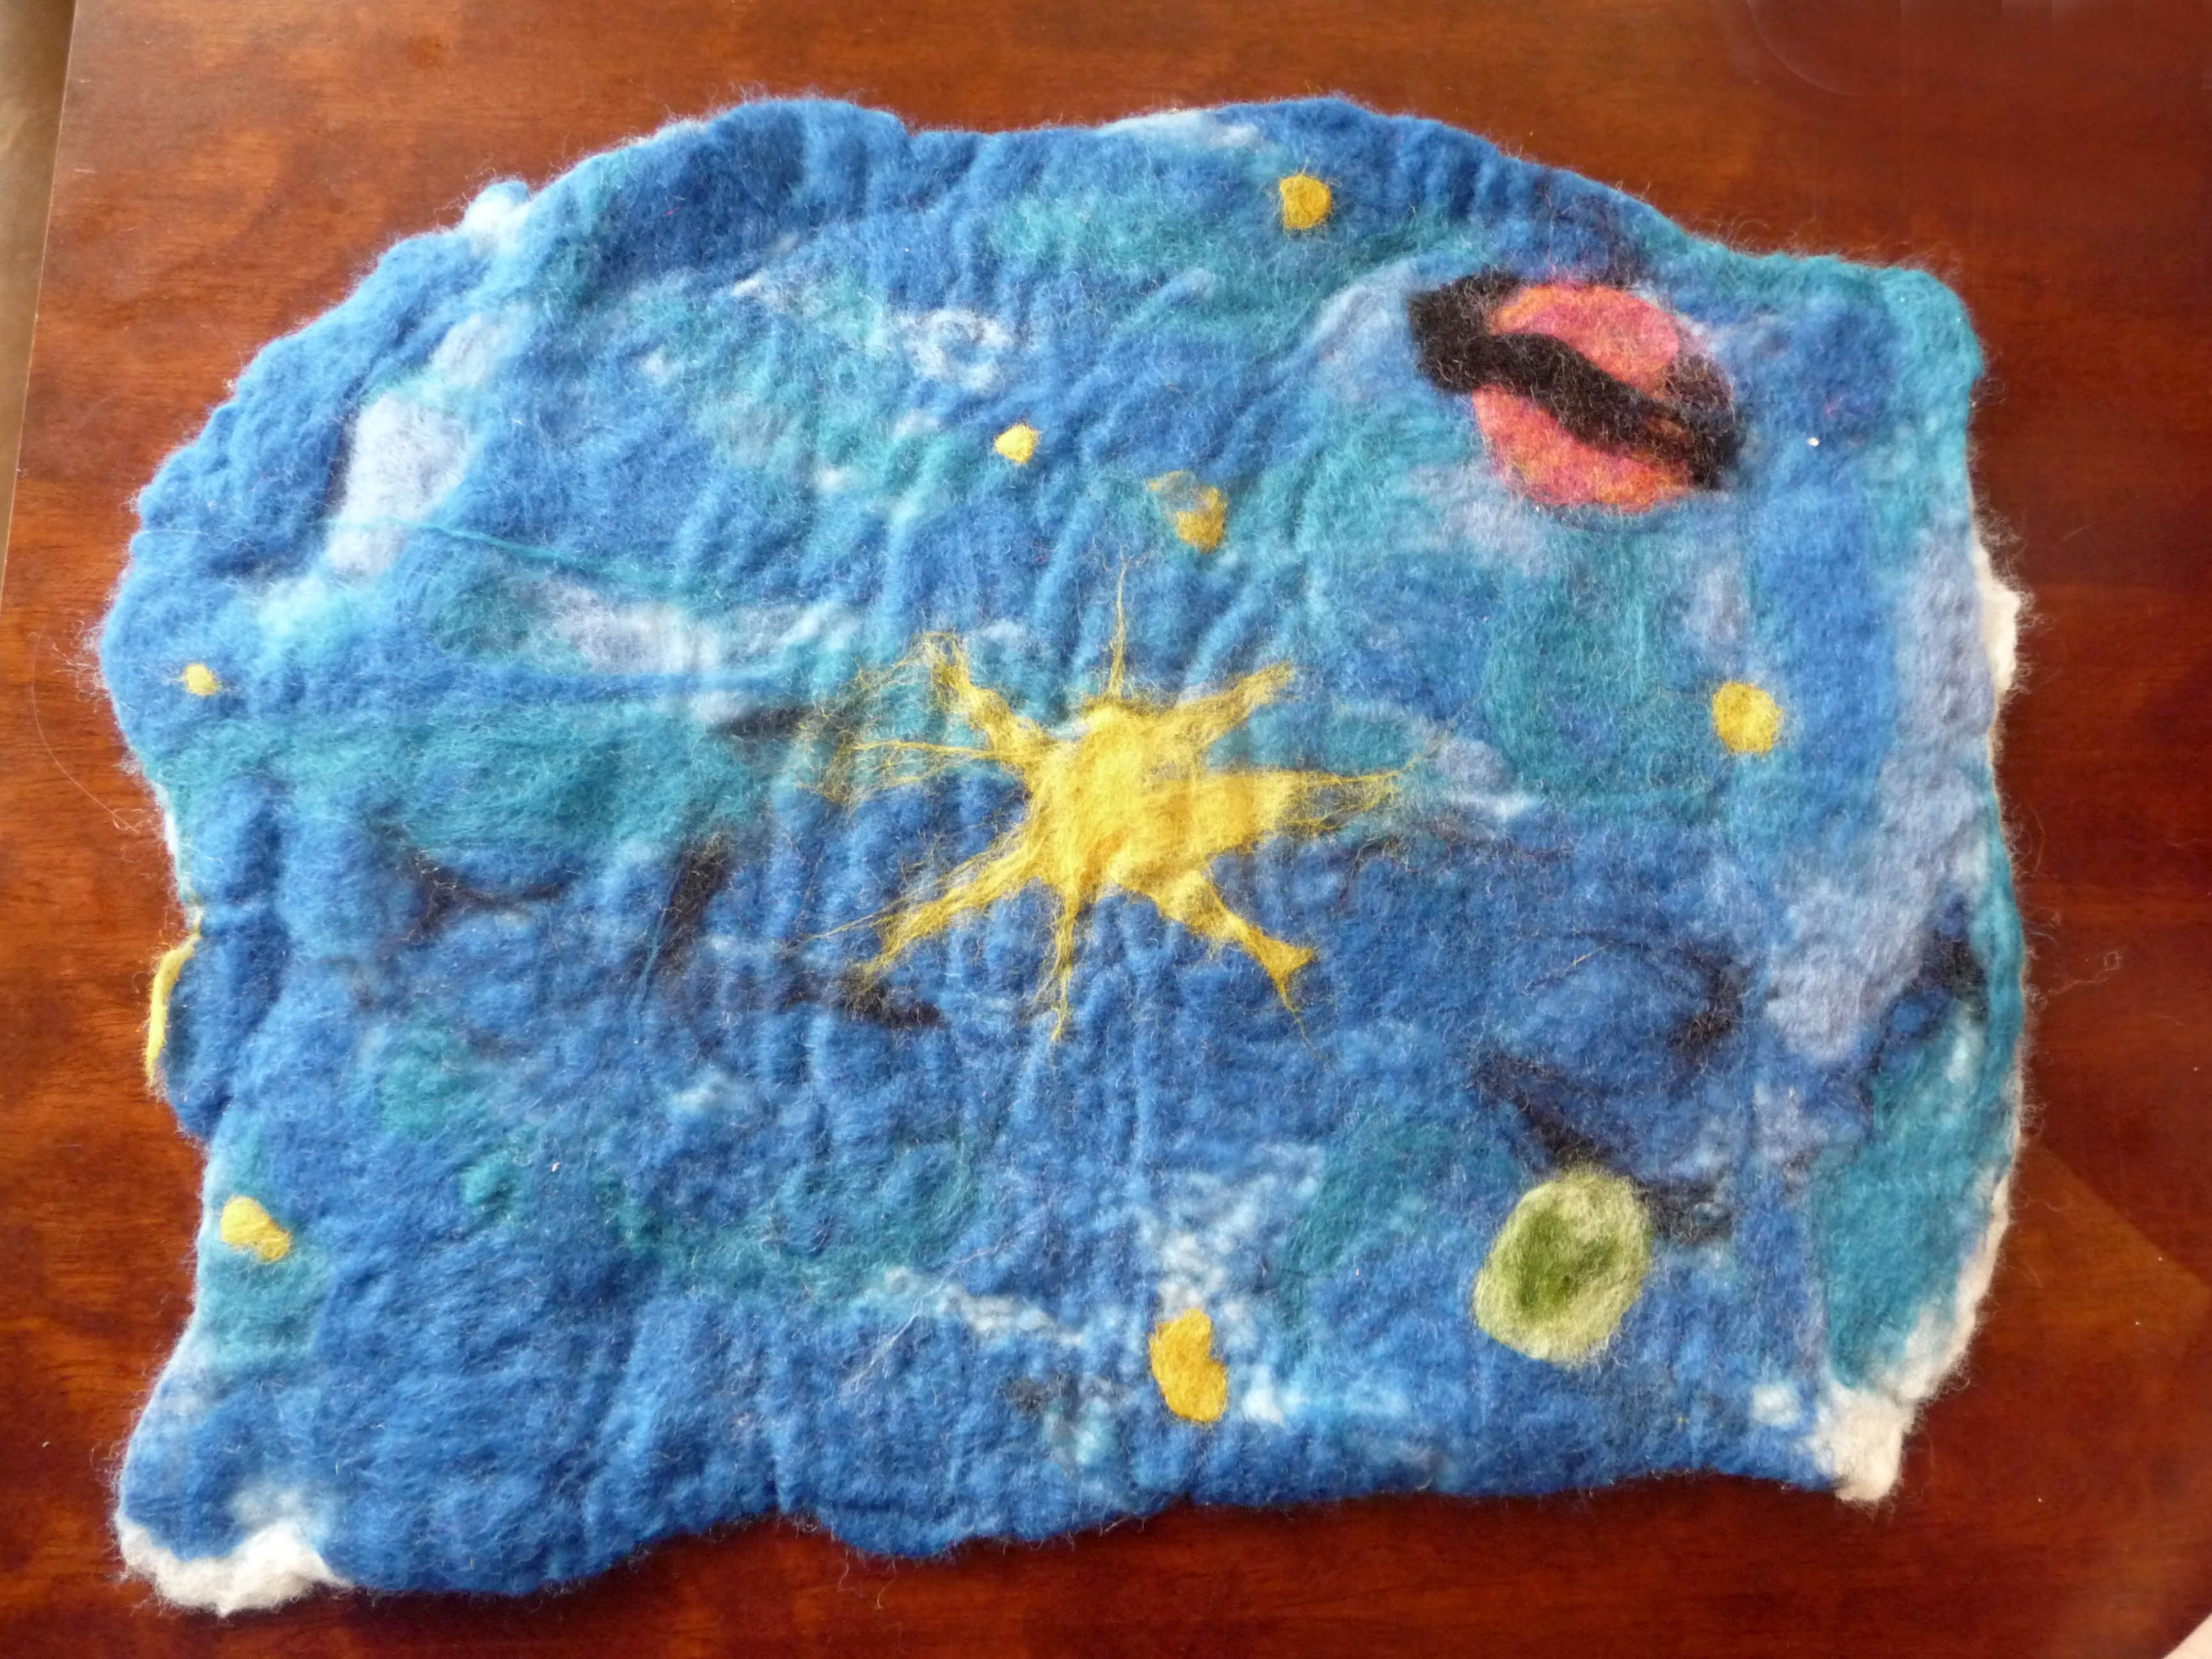  felt picture made by YE at NW Regional Day 2014